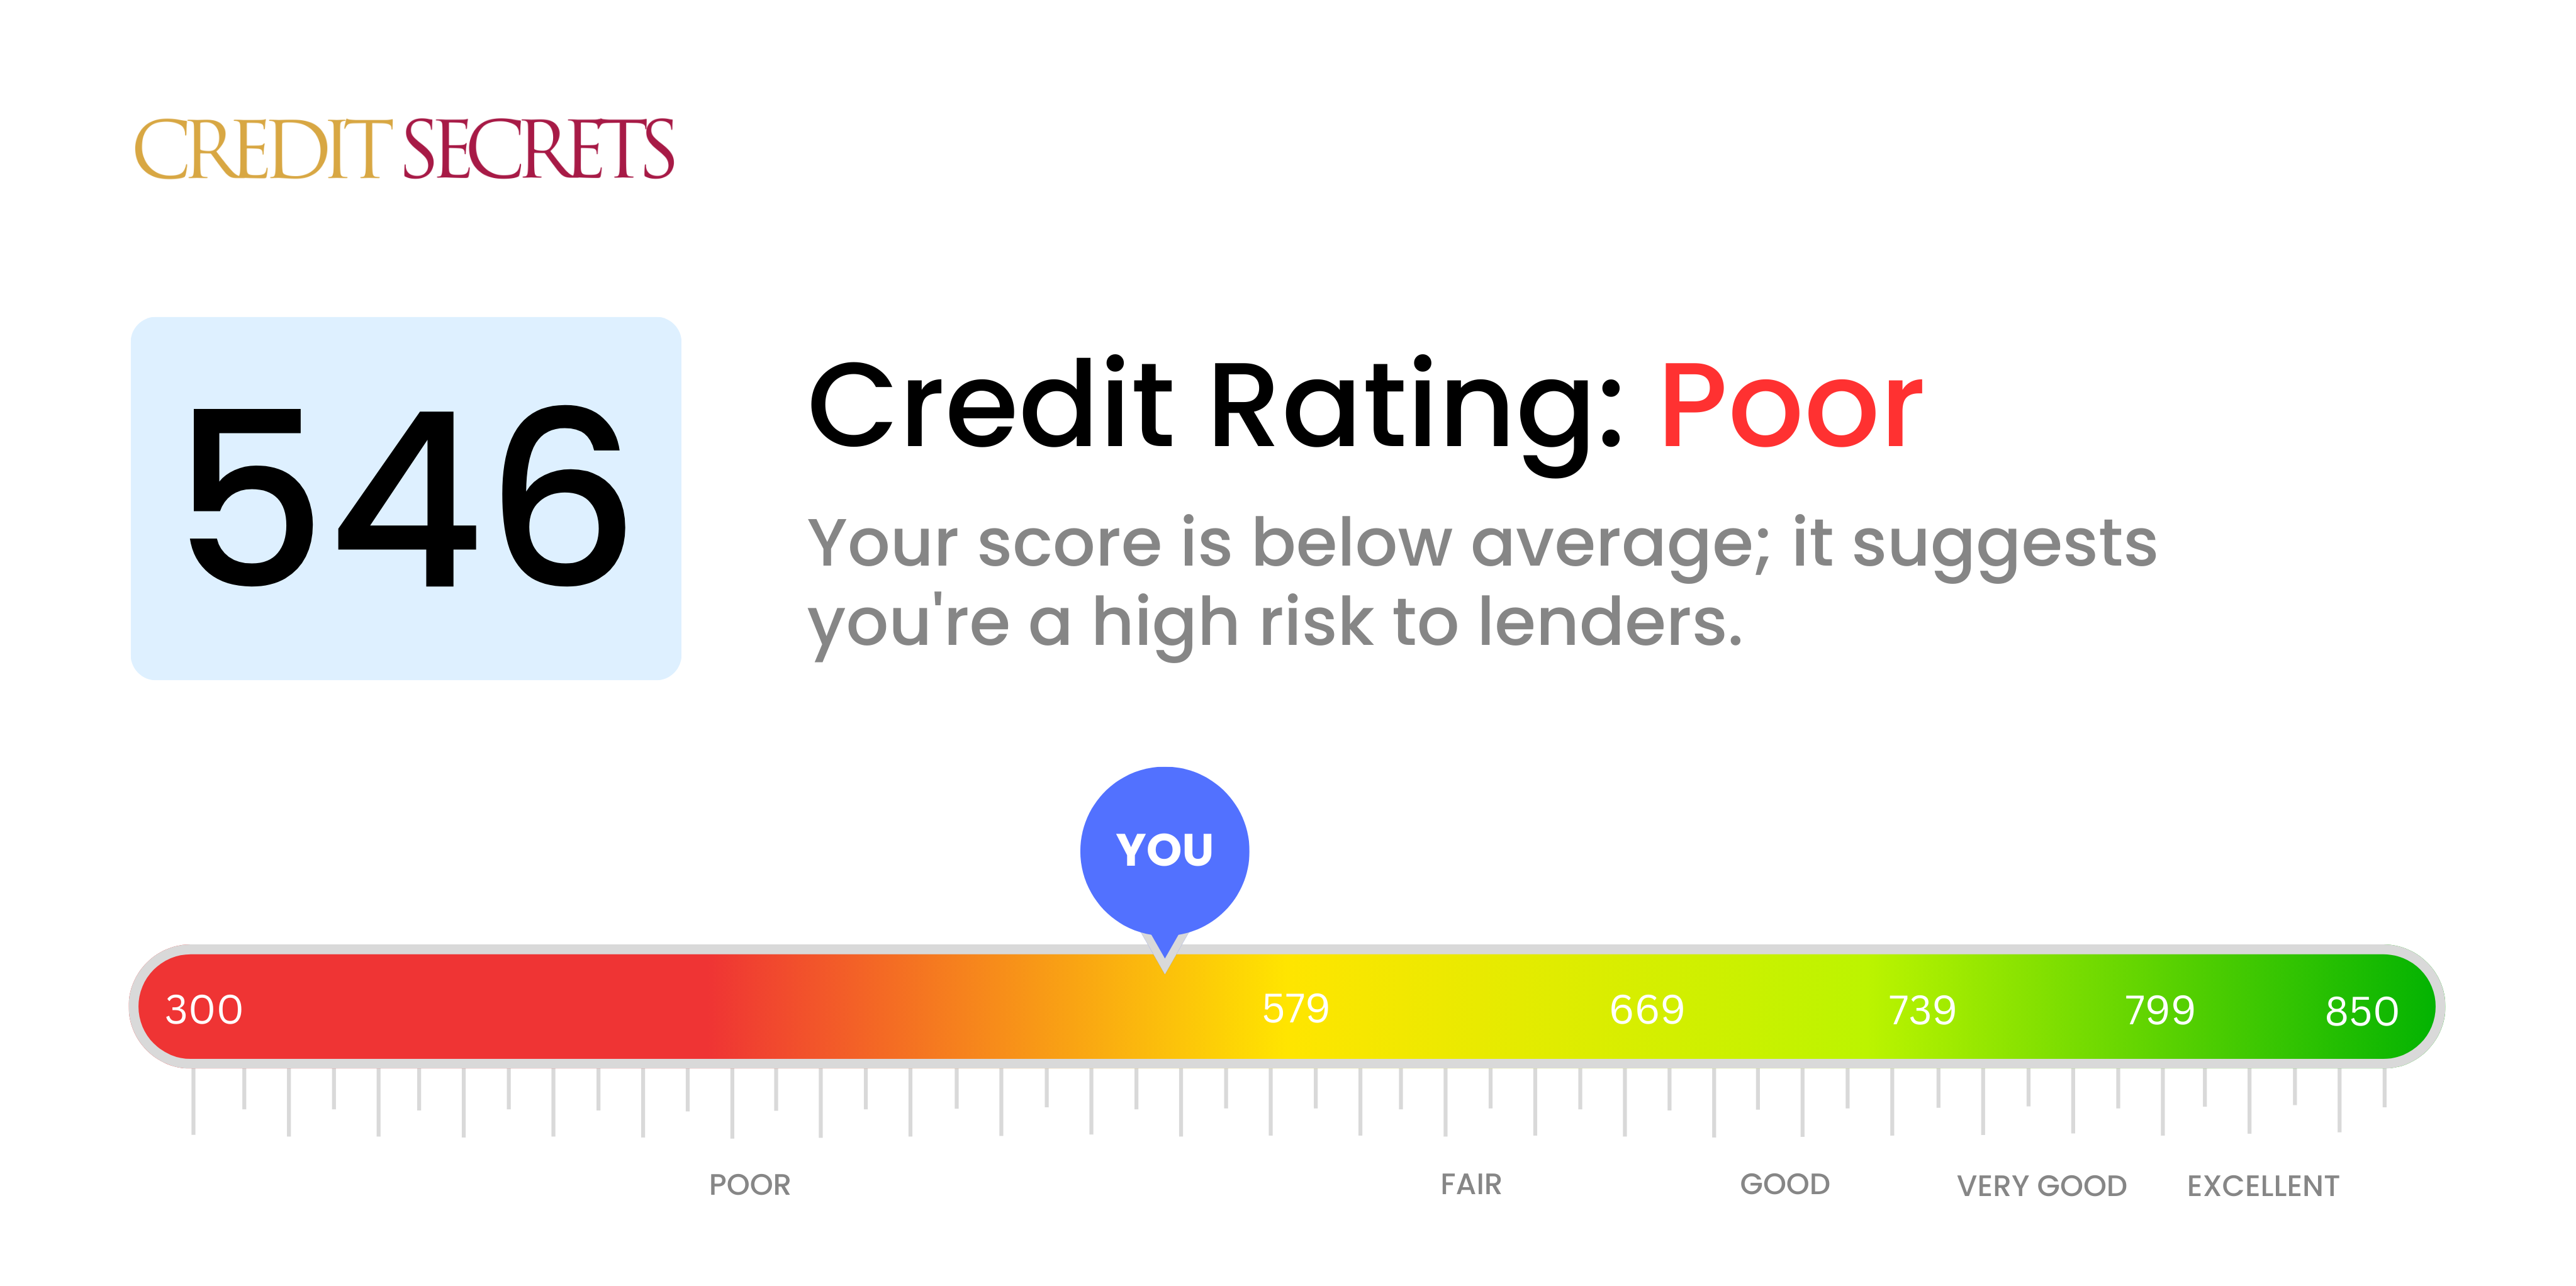 Is 546 a good credit score?